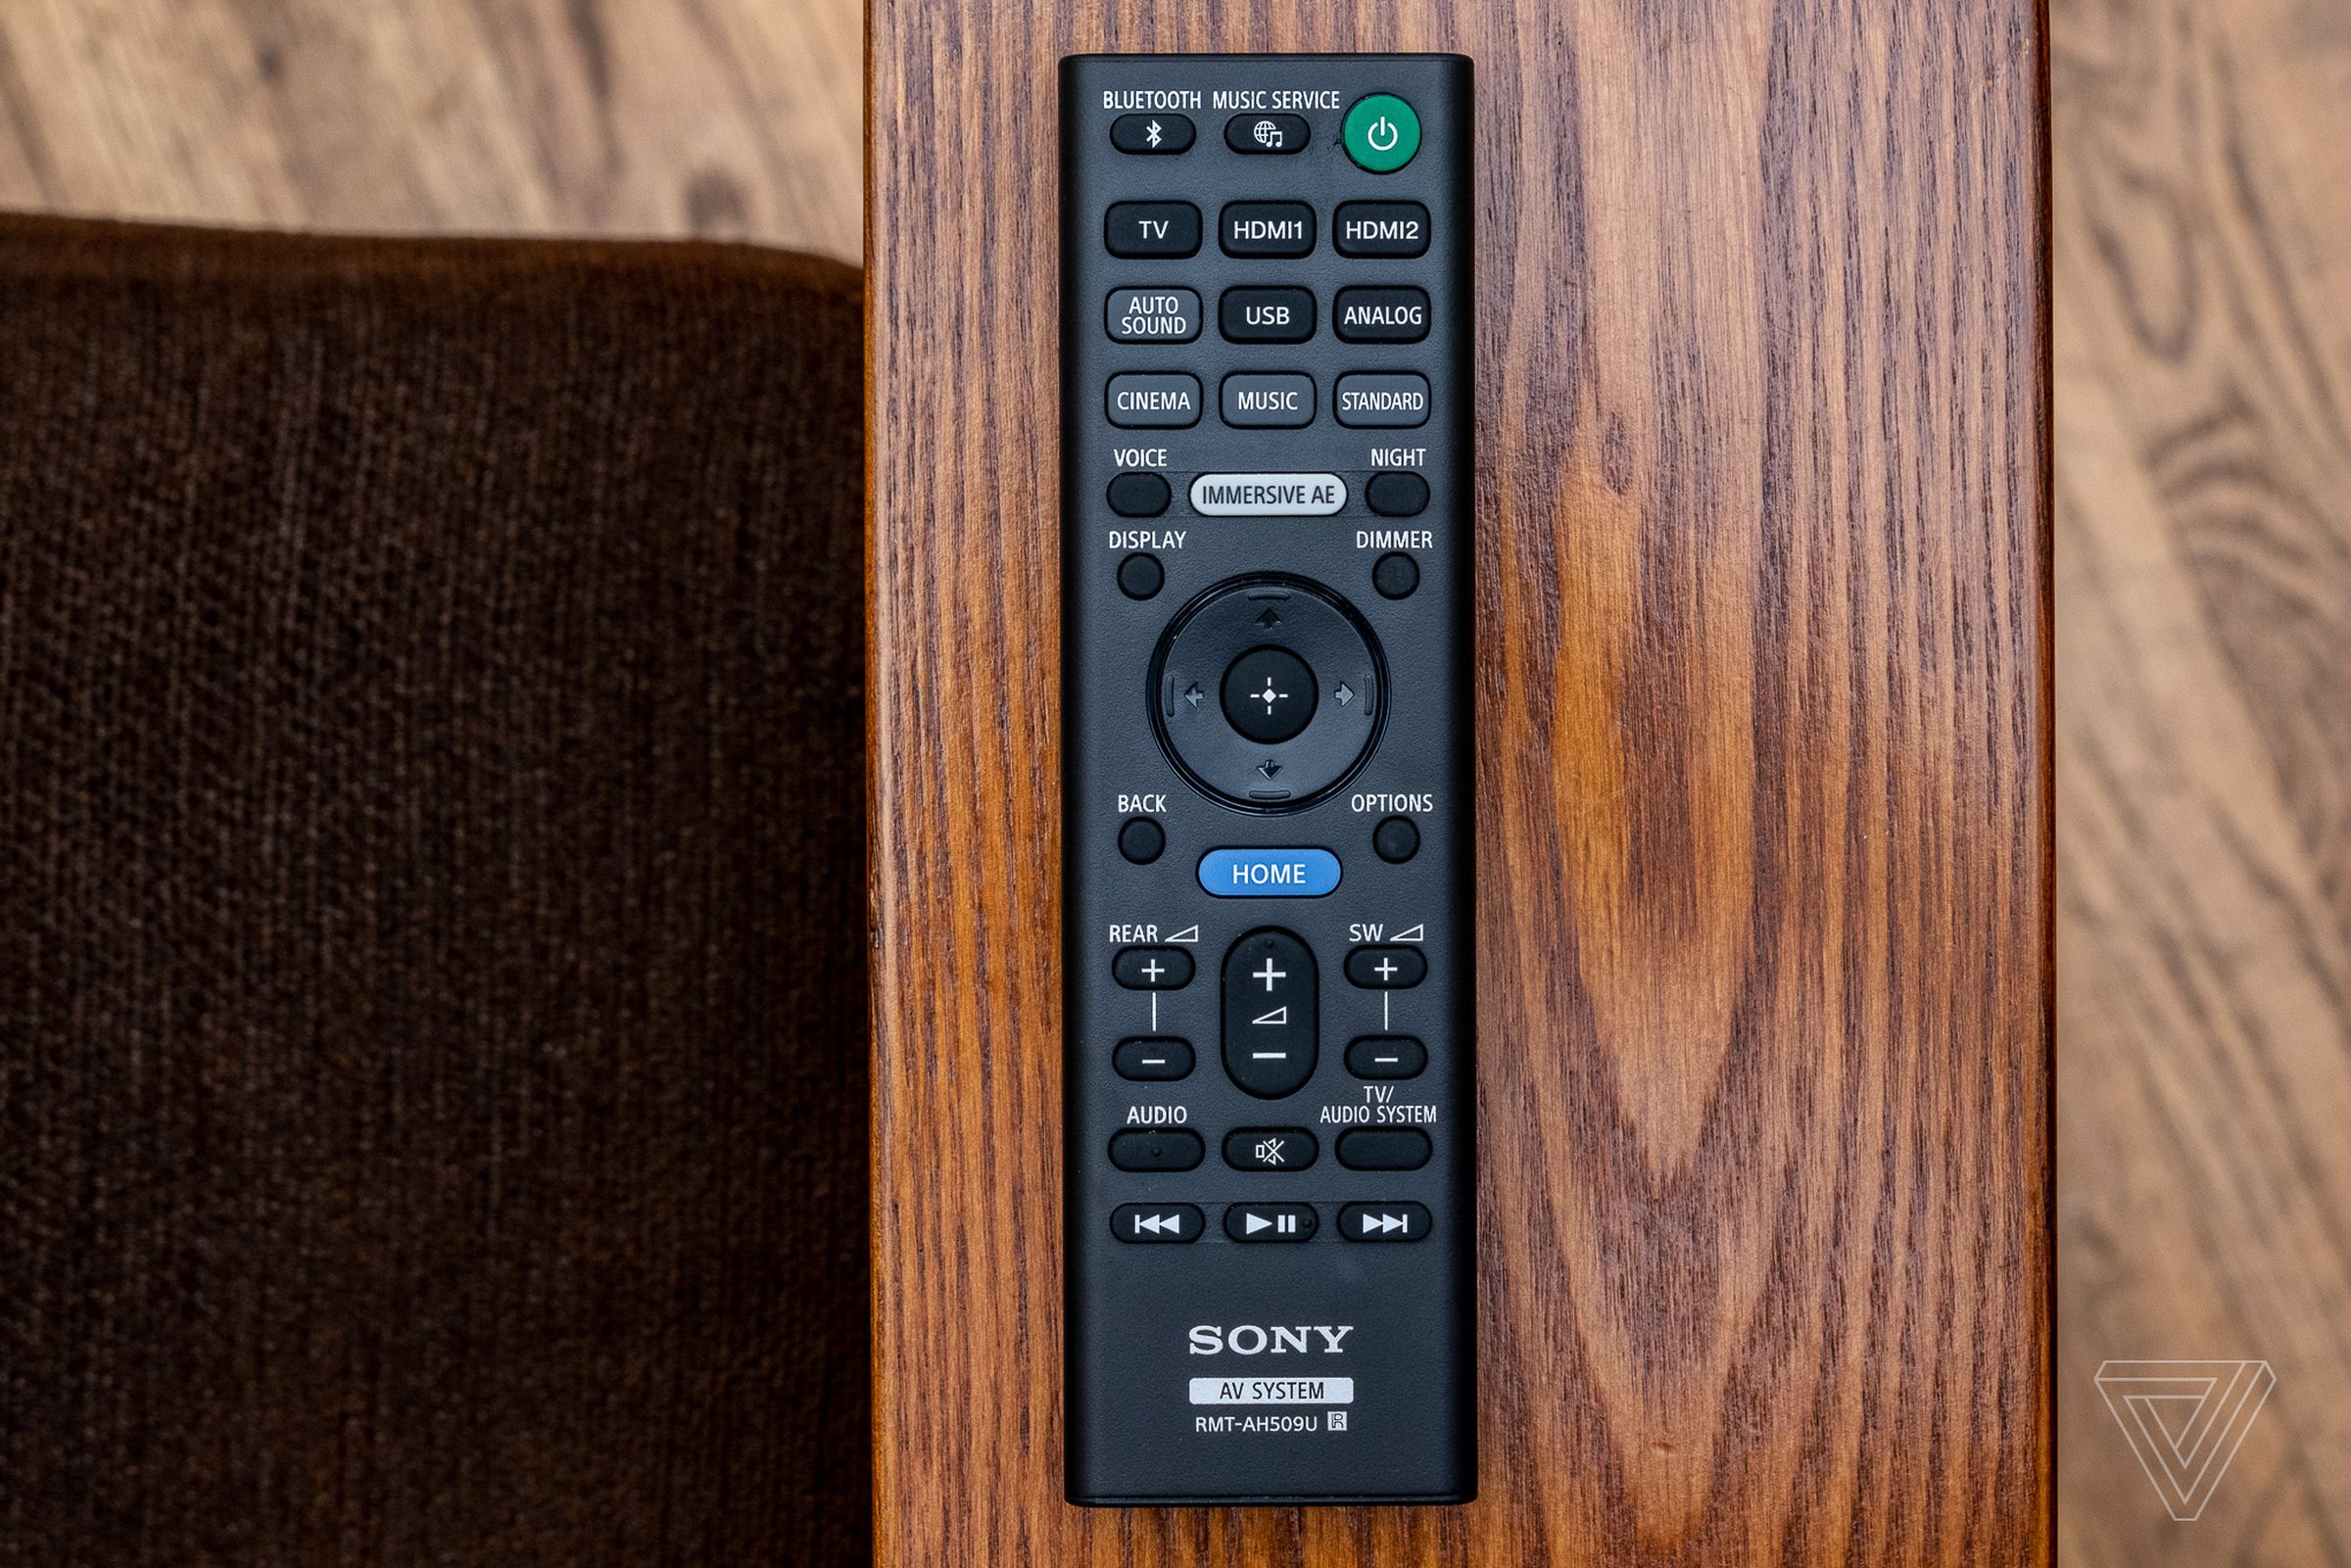 The HT-A7000 comes with an extremely Sony remote.